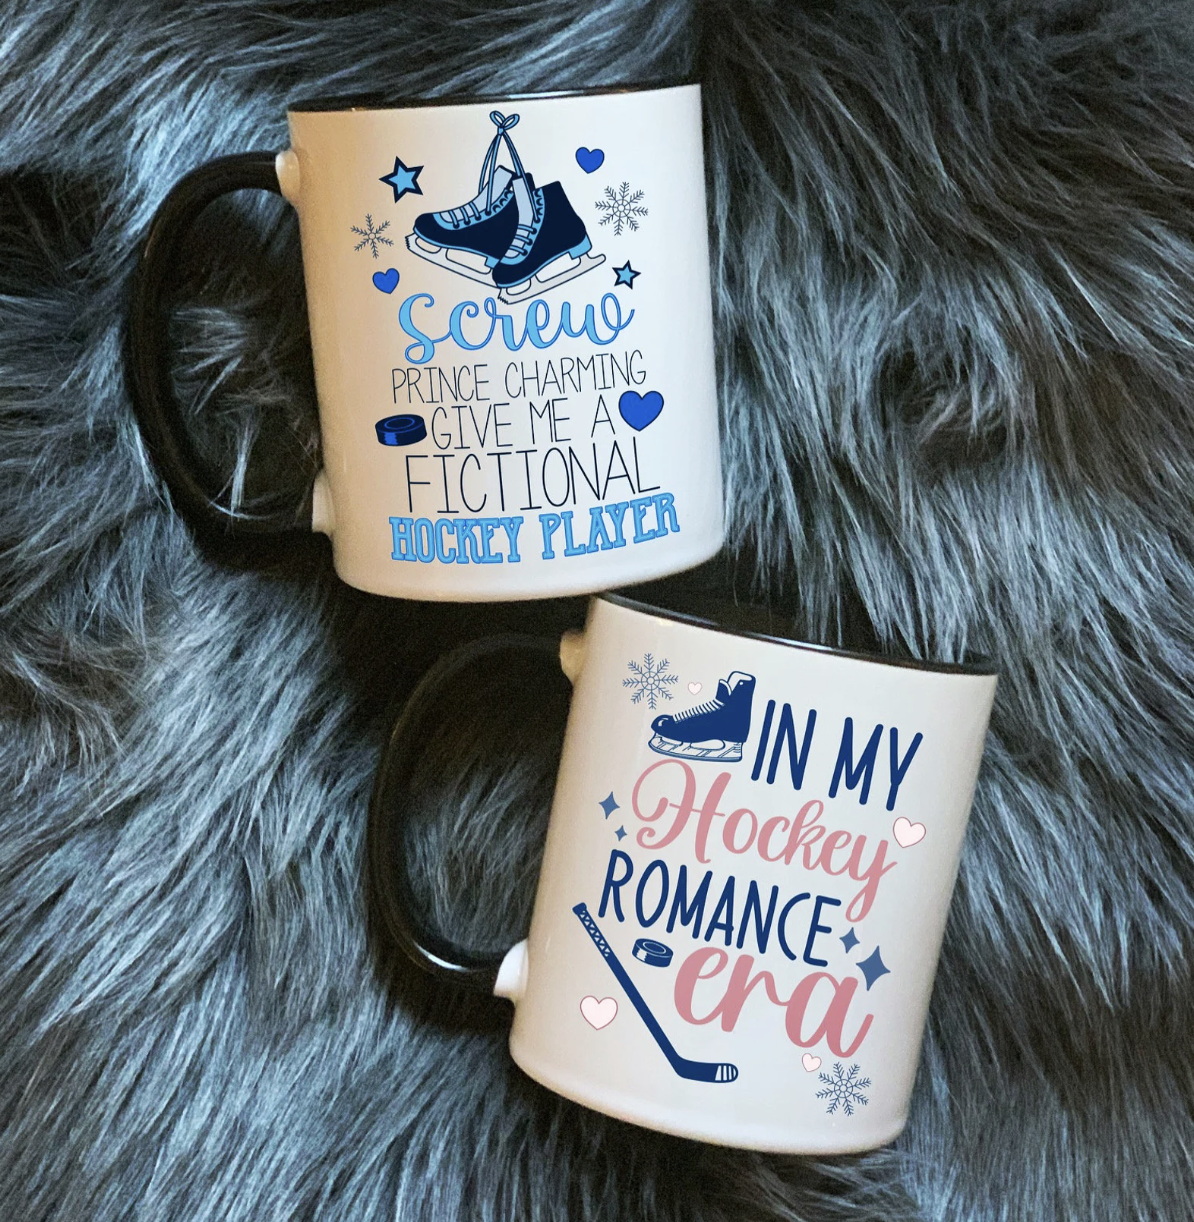 image of two white mugs with black handles and designed text. one says "screw prince charming, give me a fictional hockey player," and the second says, "in my hockey romance era"